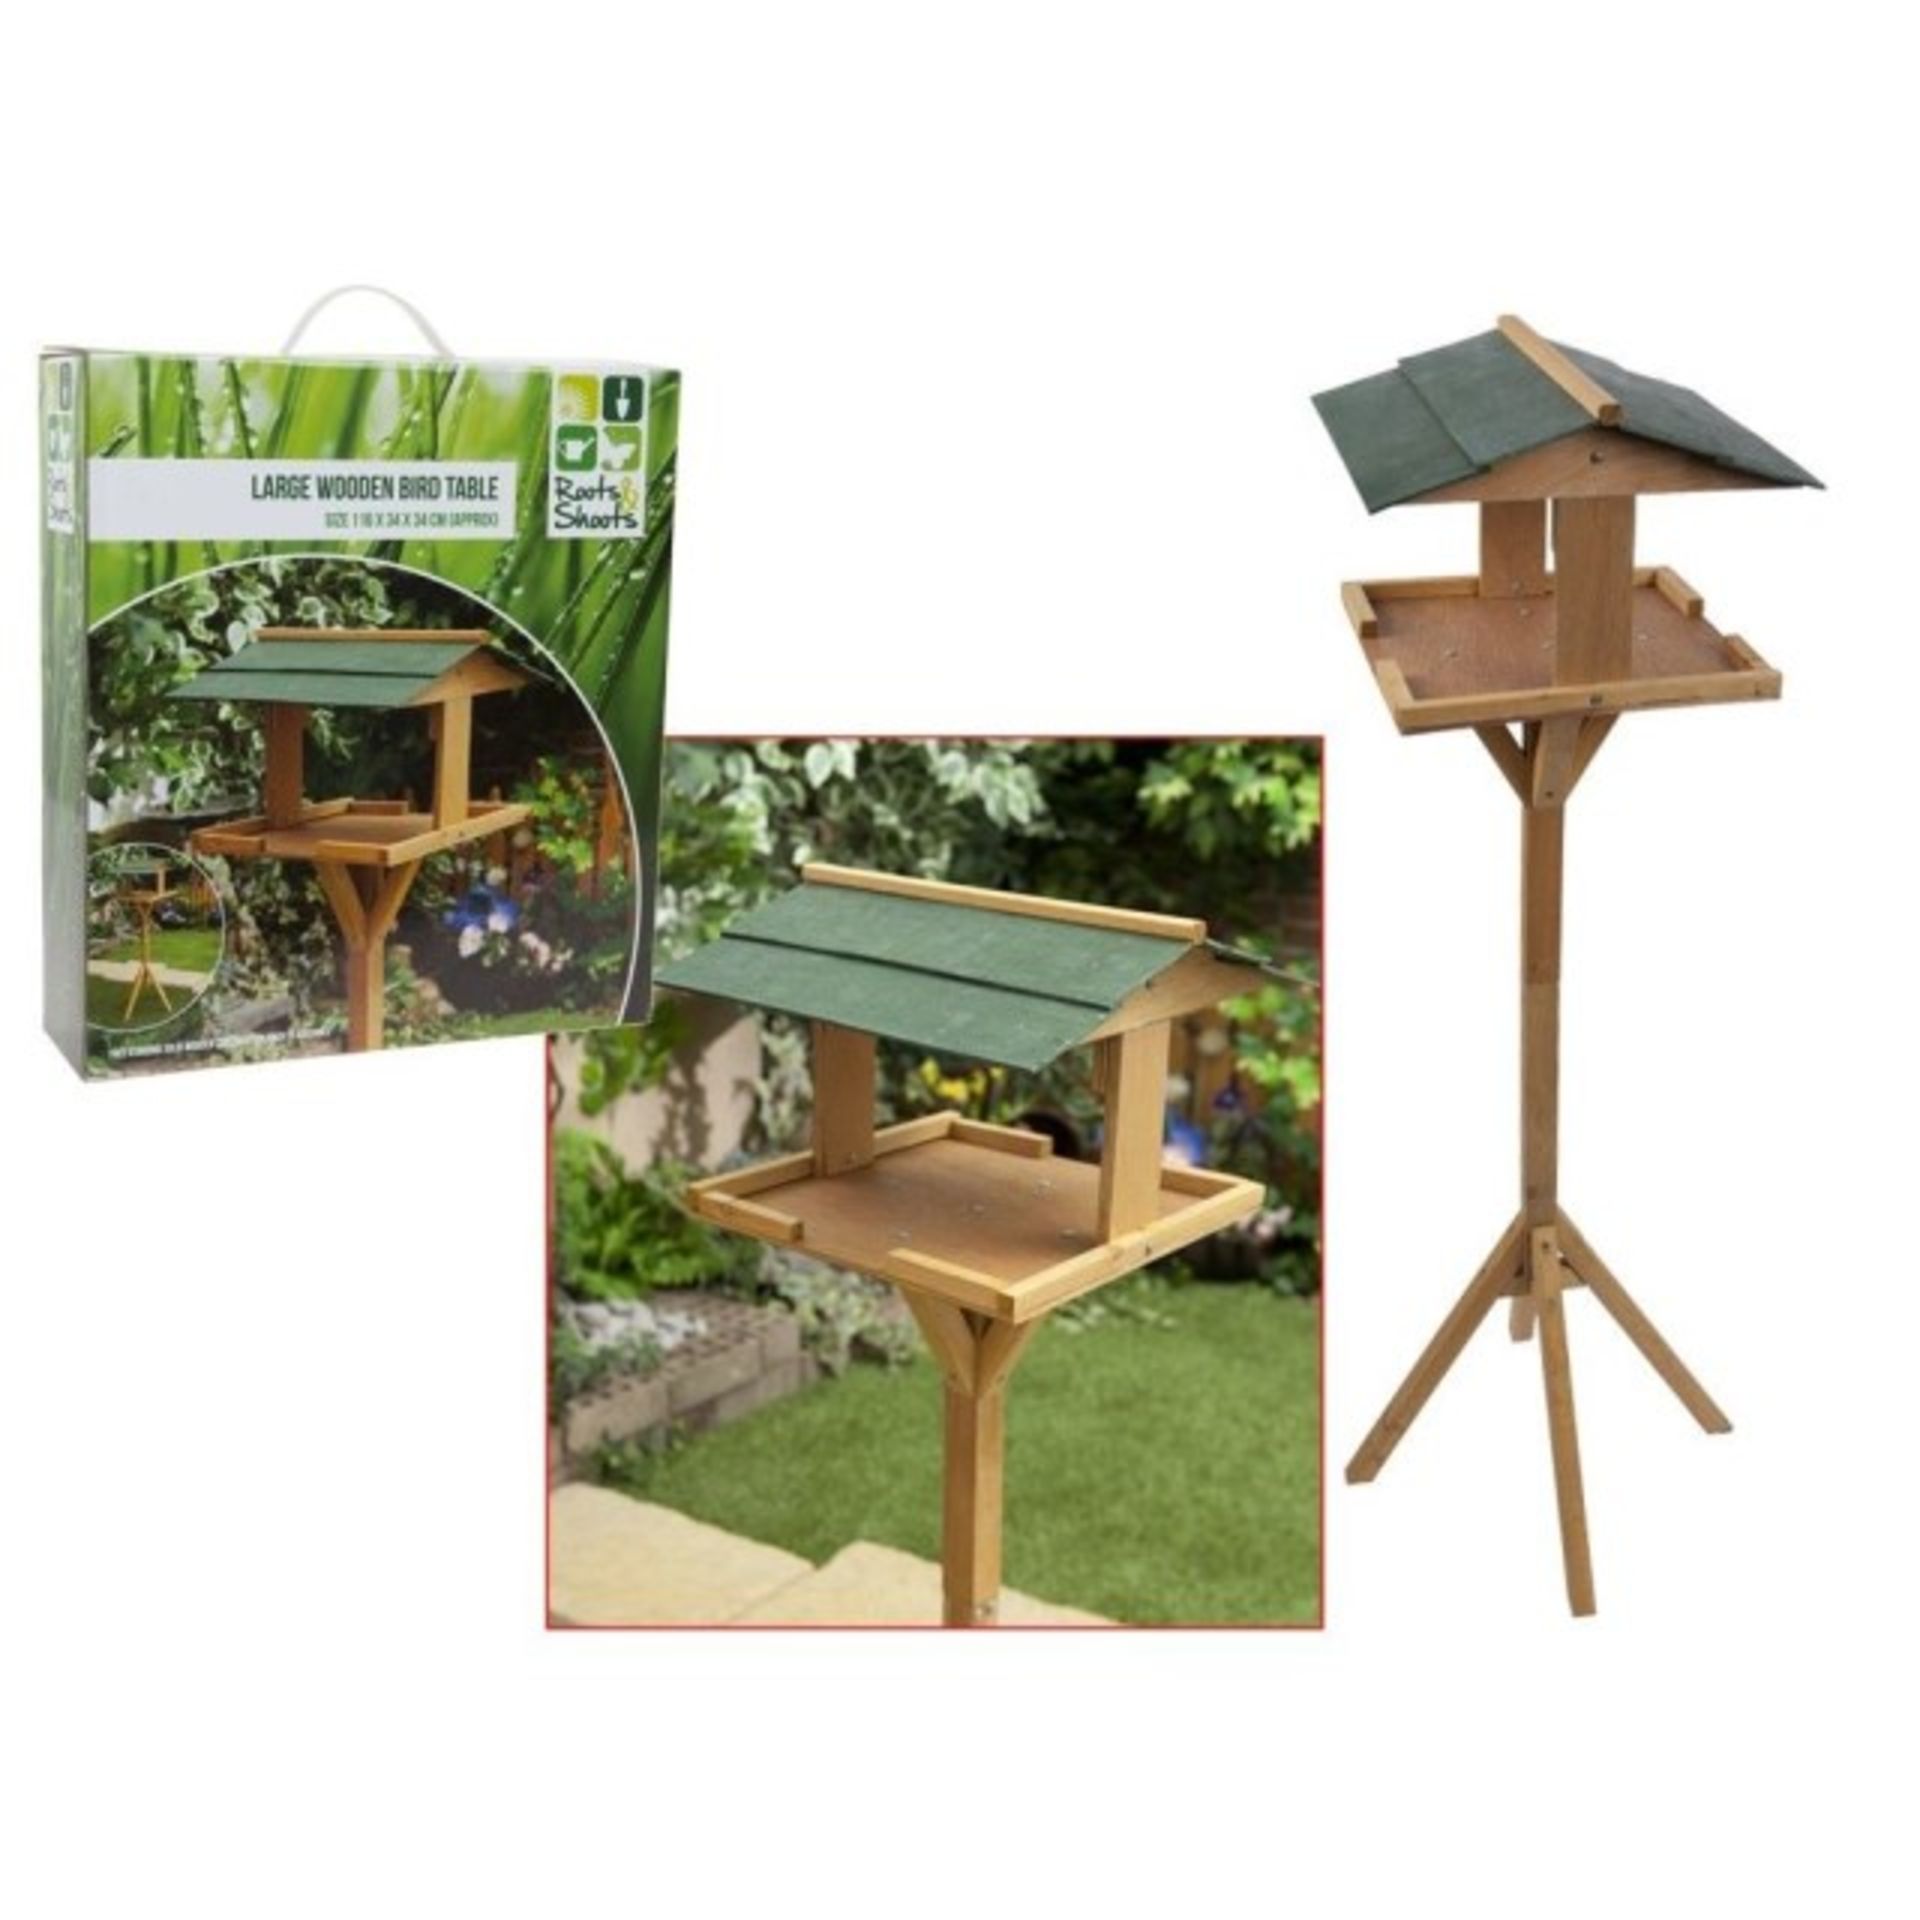 V Brand New Large Wooden Bird Table (116 x 34 x 34 cm Approx)